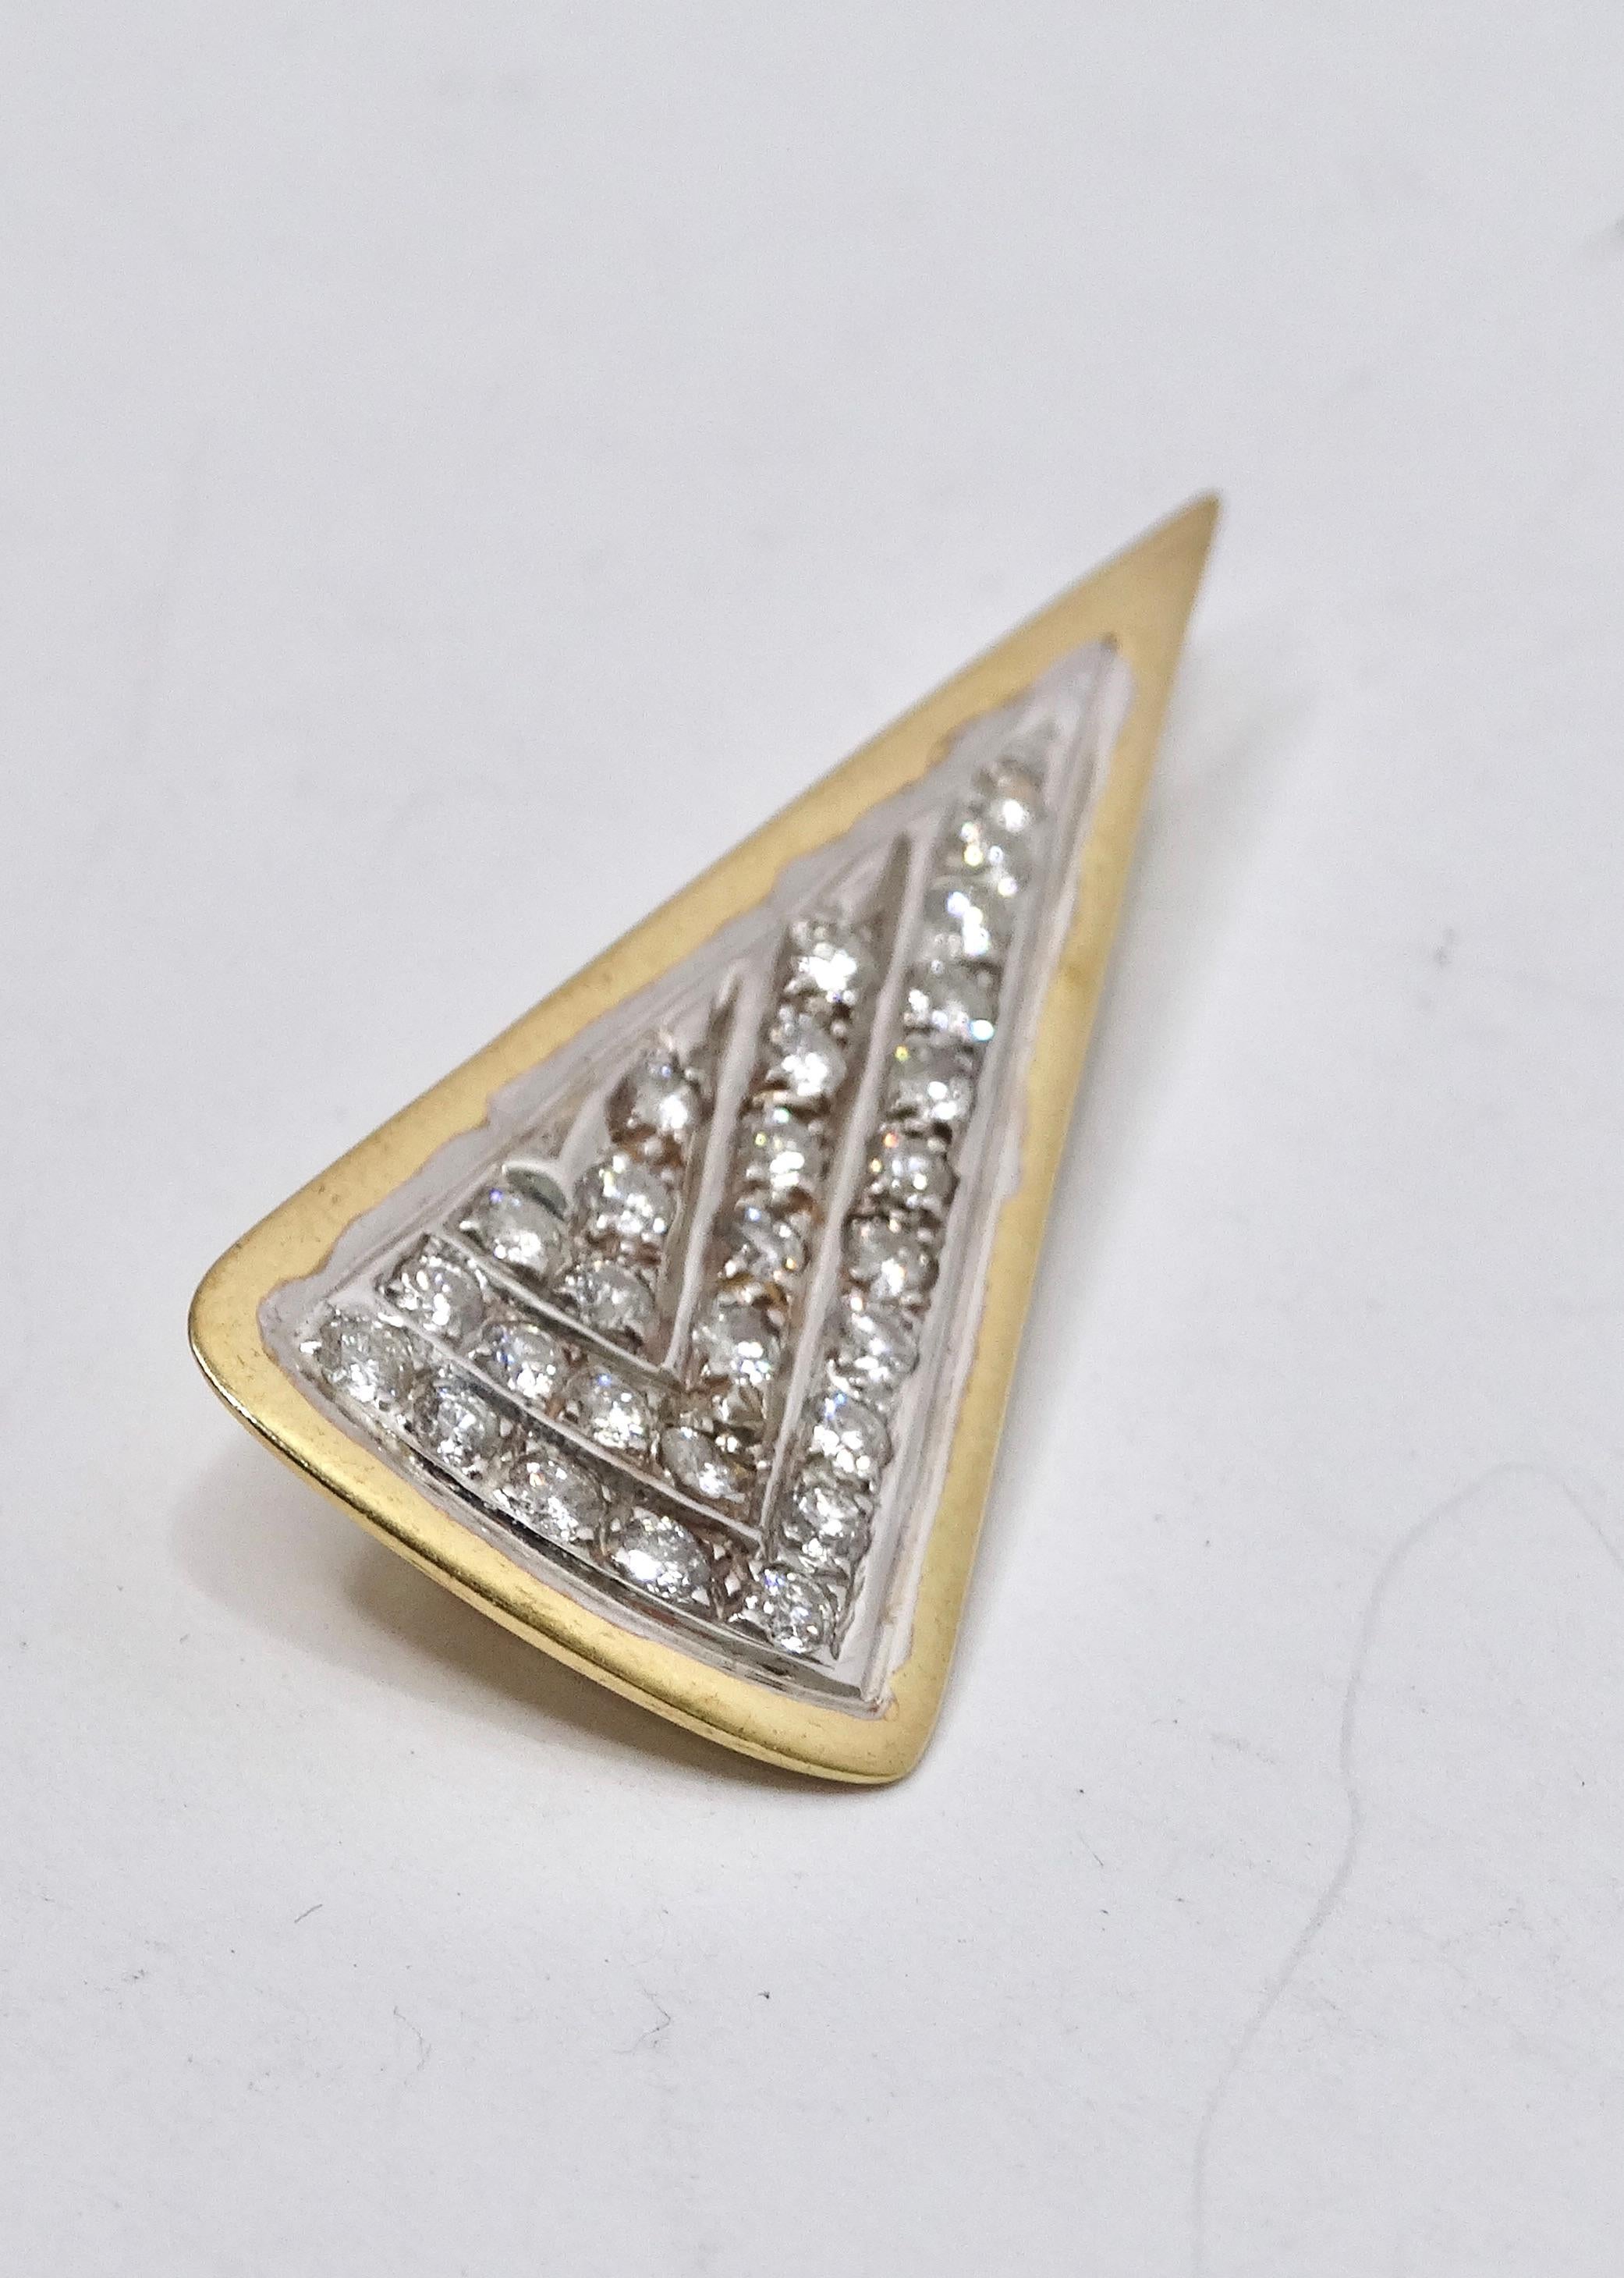 This brooch is a tiny accessory that can pack a big punch. This brooch is an Art Deco gem! The sparkle of the diamonds will catch someone from across the room. It features a vibrant gold piping with 28 round diamonds adorning the middle. It is made